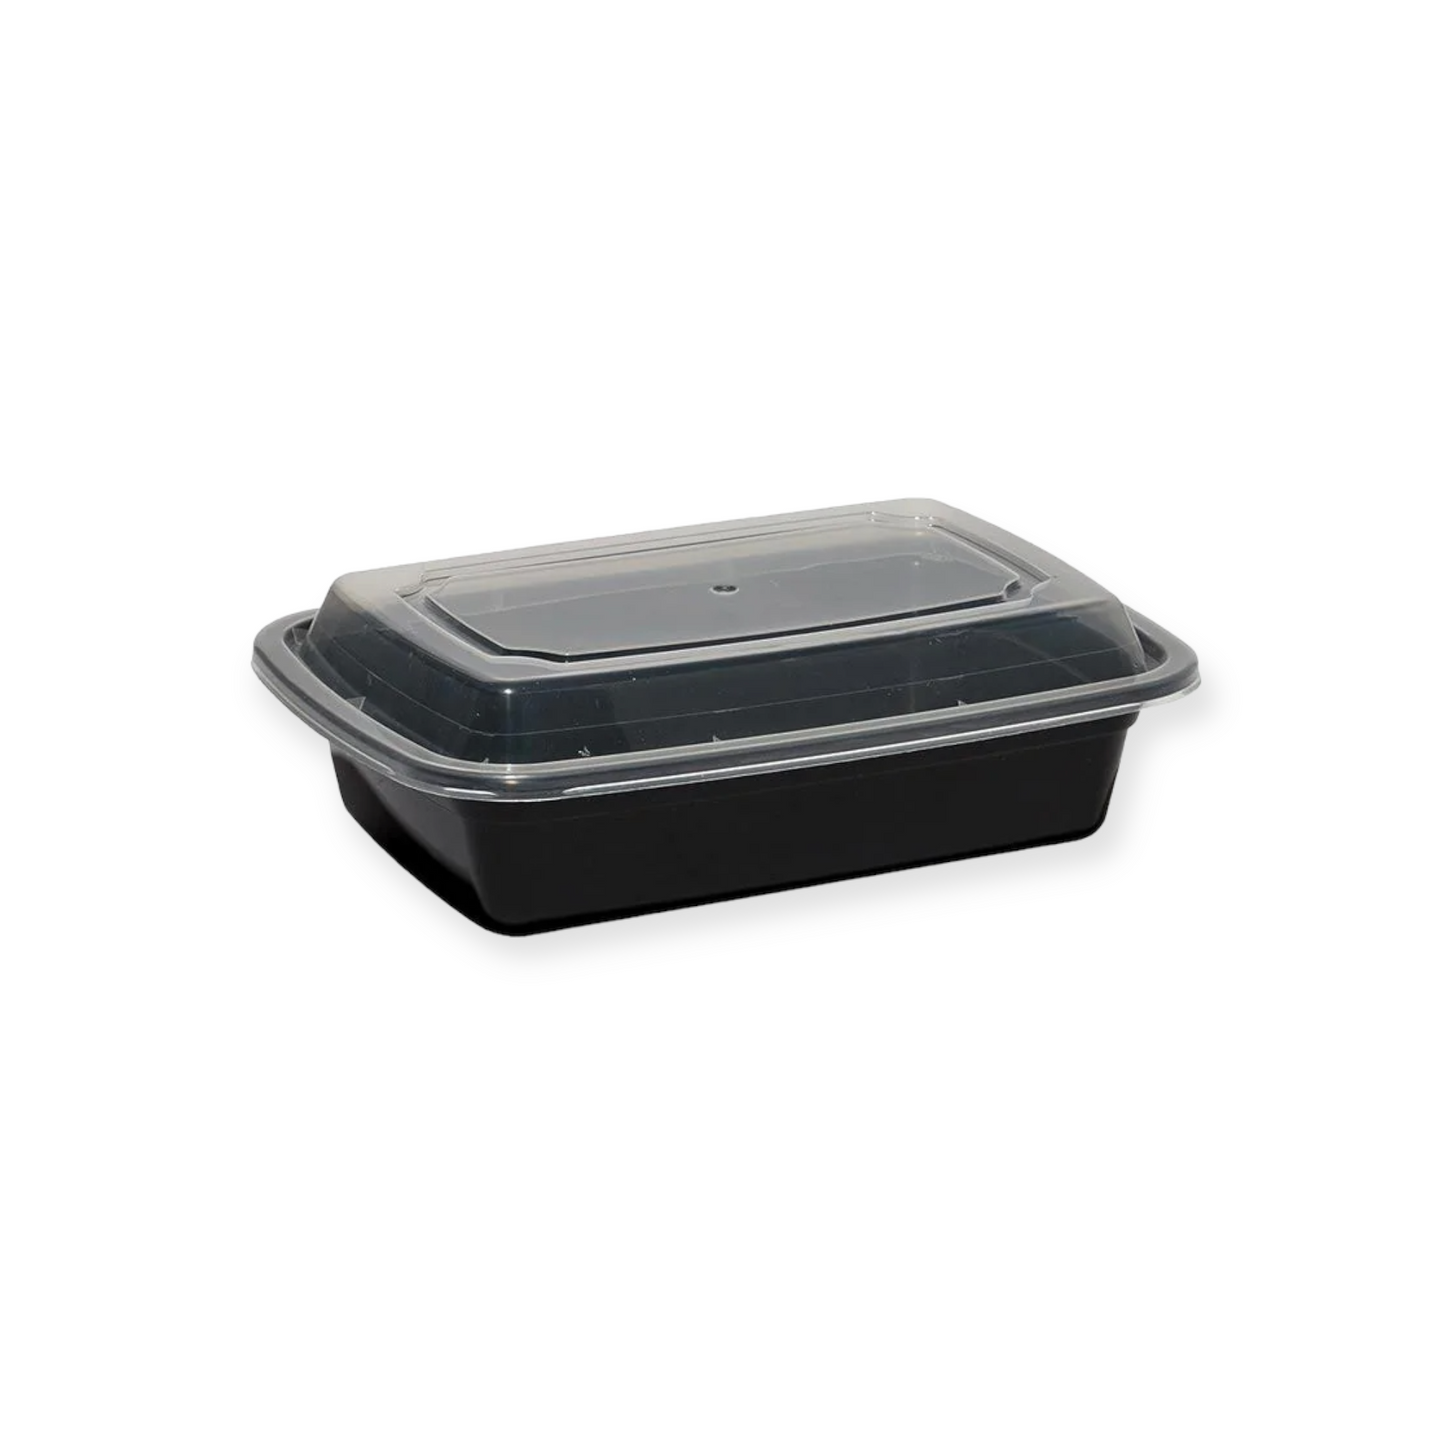 12oz. Black Rectangle Micro Carryout Food Containers with Lids 150 Sets